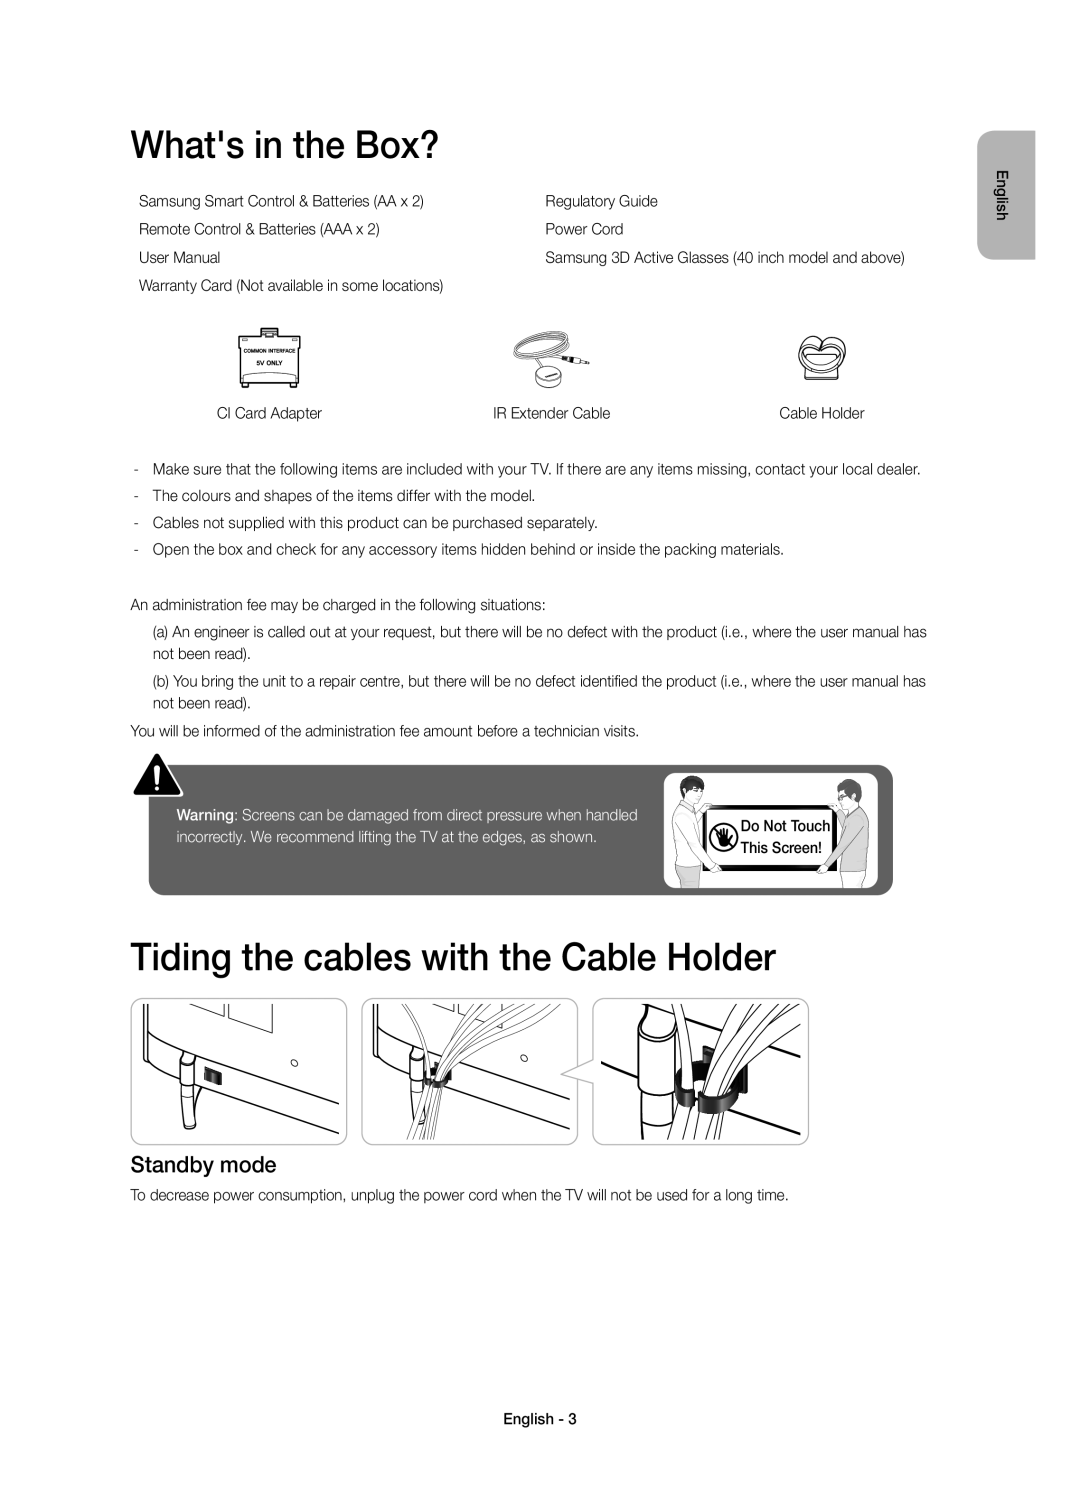 Samsung UE32H6410SSXZG manual Whats in the Box?, Tiding the cables with the Cable Holder, Standby mode, This Screen 